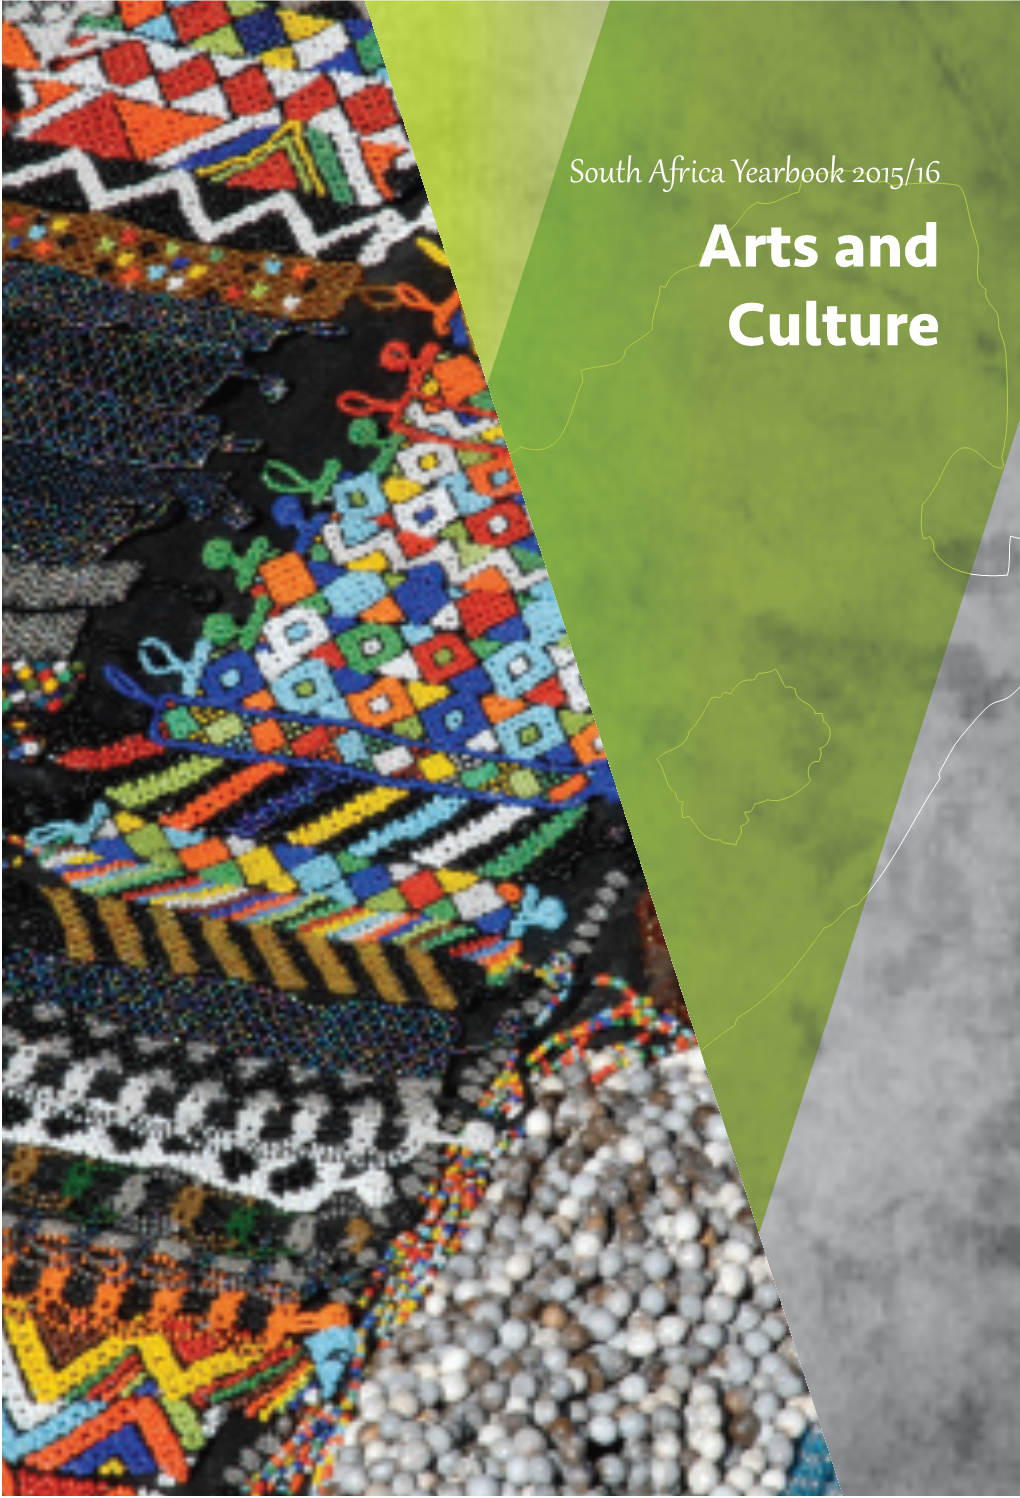 South Africa Yearbook 2015/16 Arts and Culture